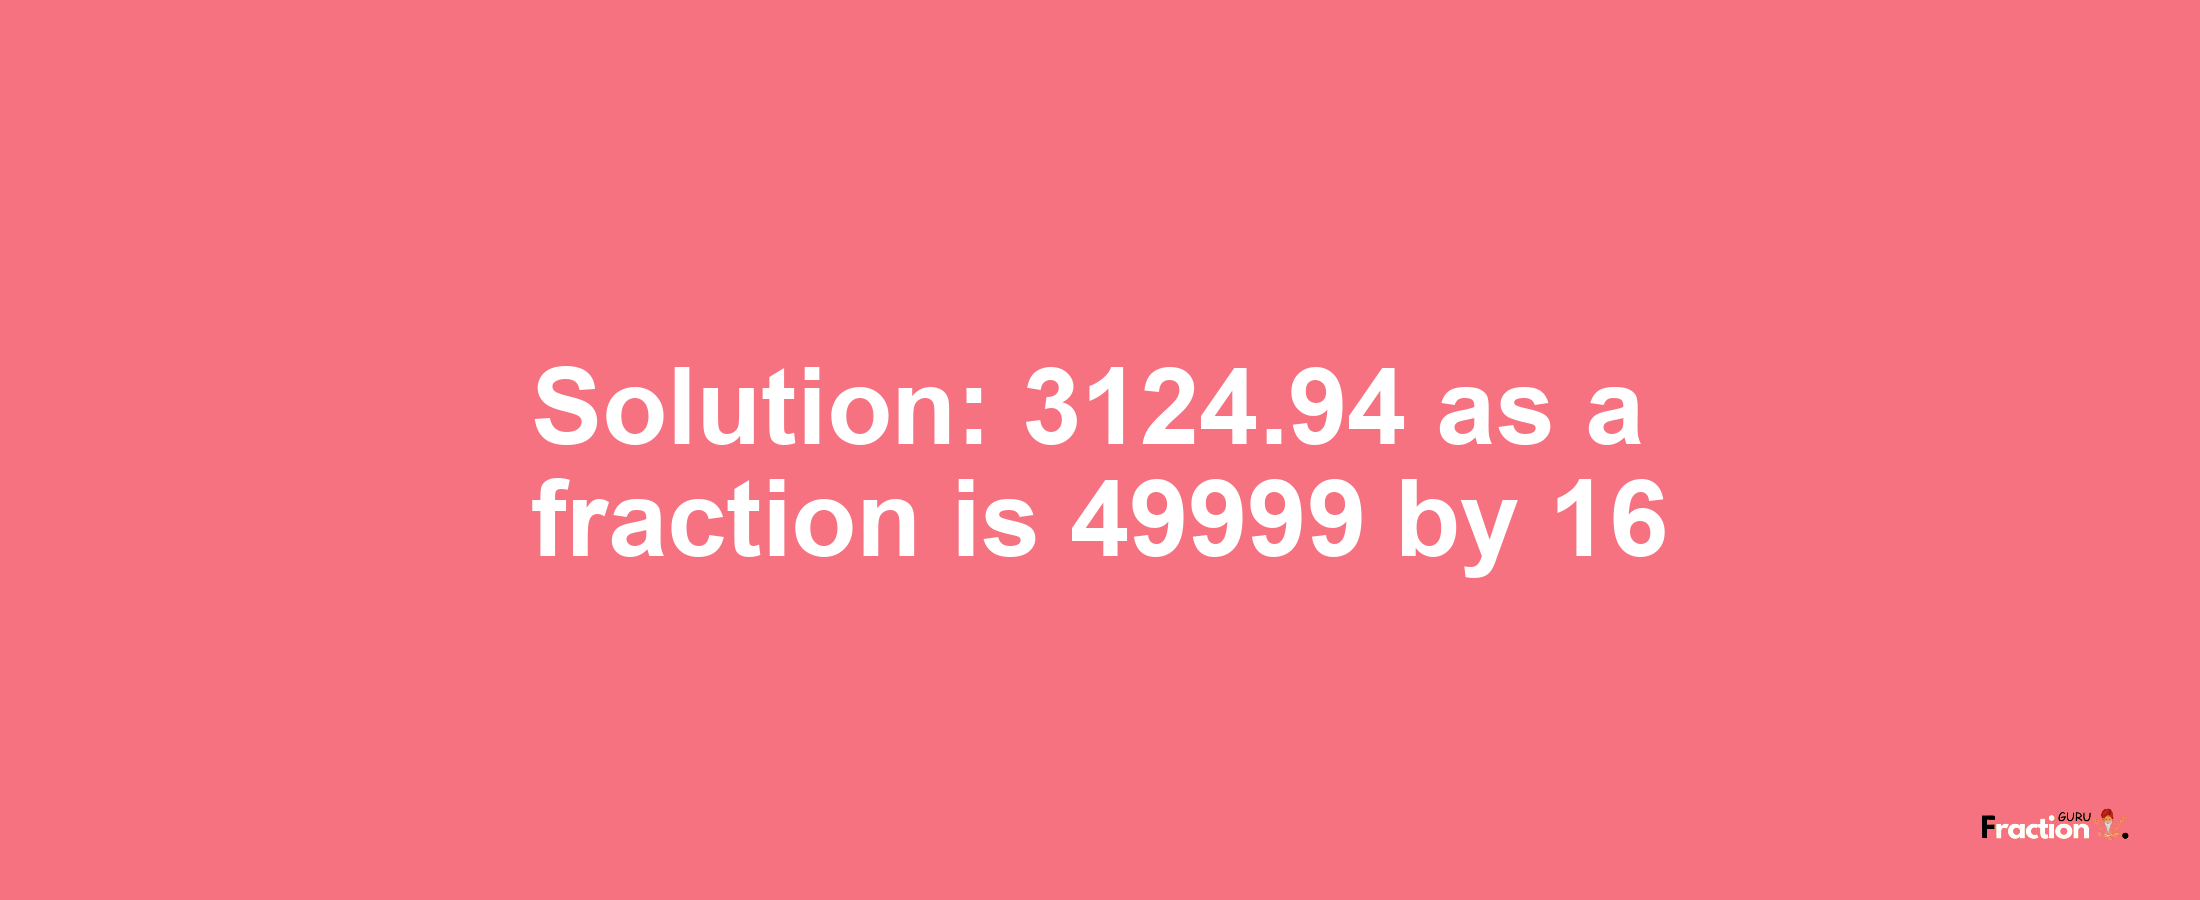 Solution:3124.94 as a fraction is 49999/16